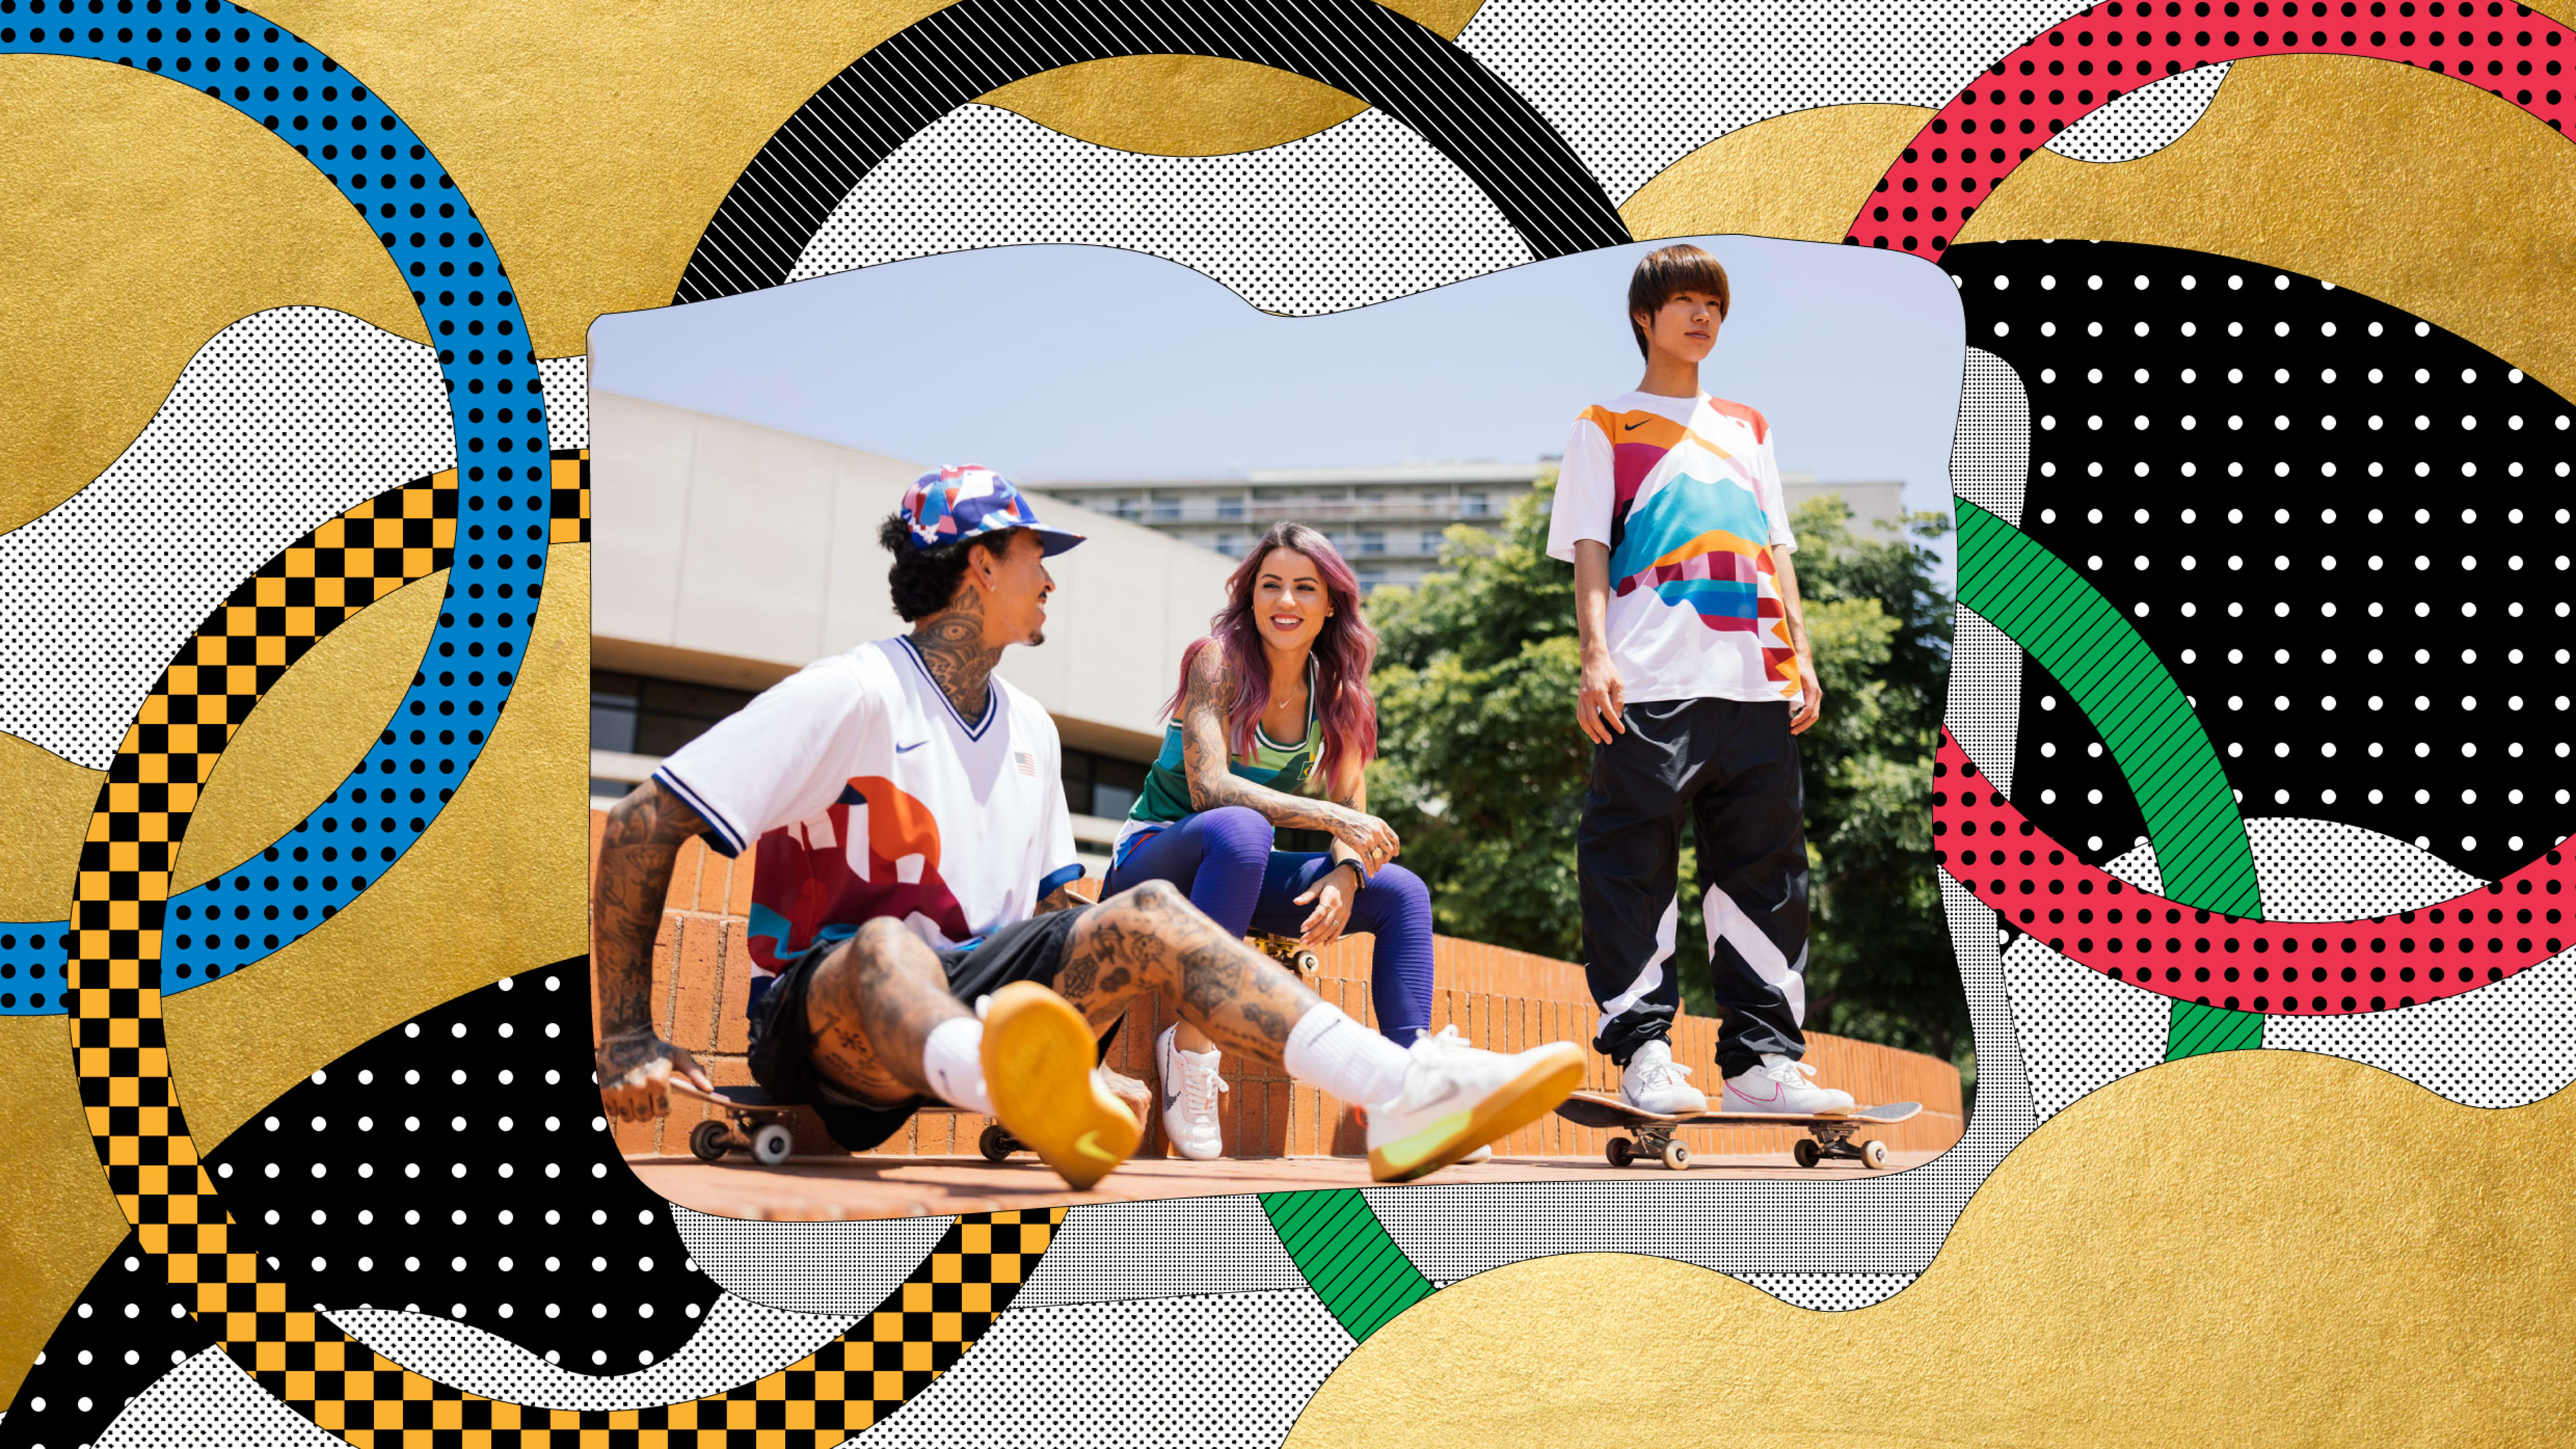 See Nike’s totally rad uniforms for skateboarding’s Olympics debut